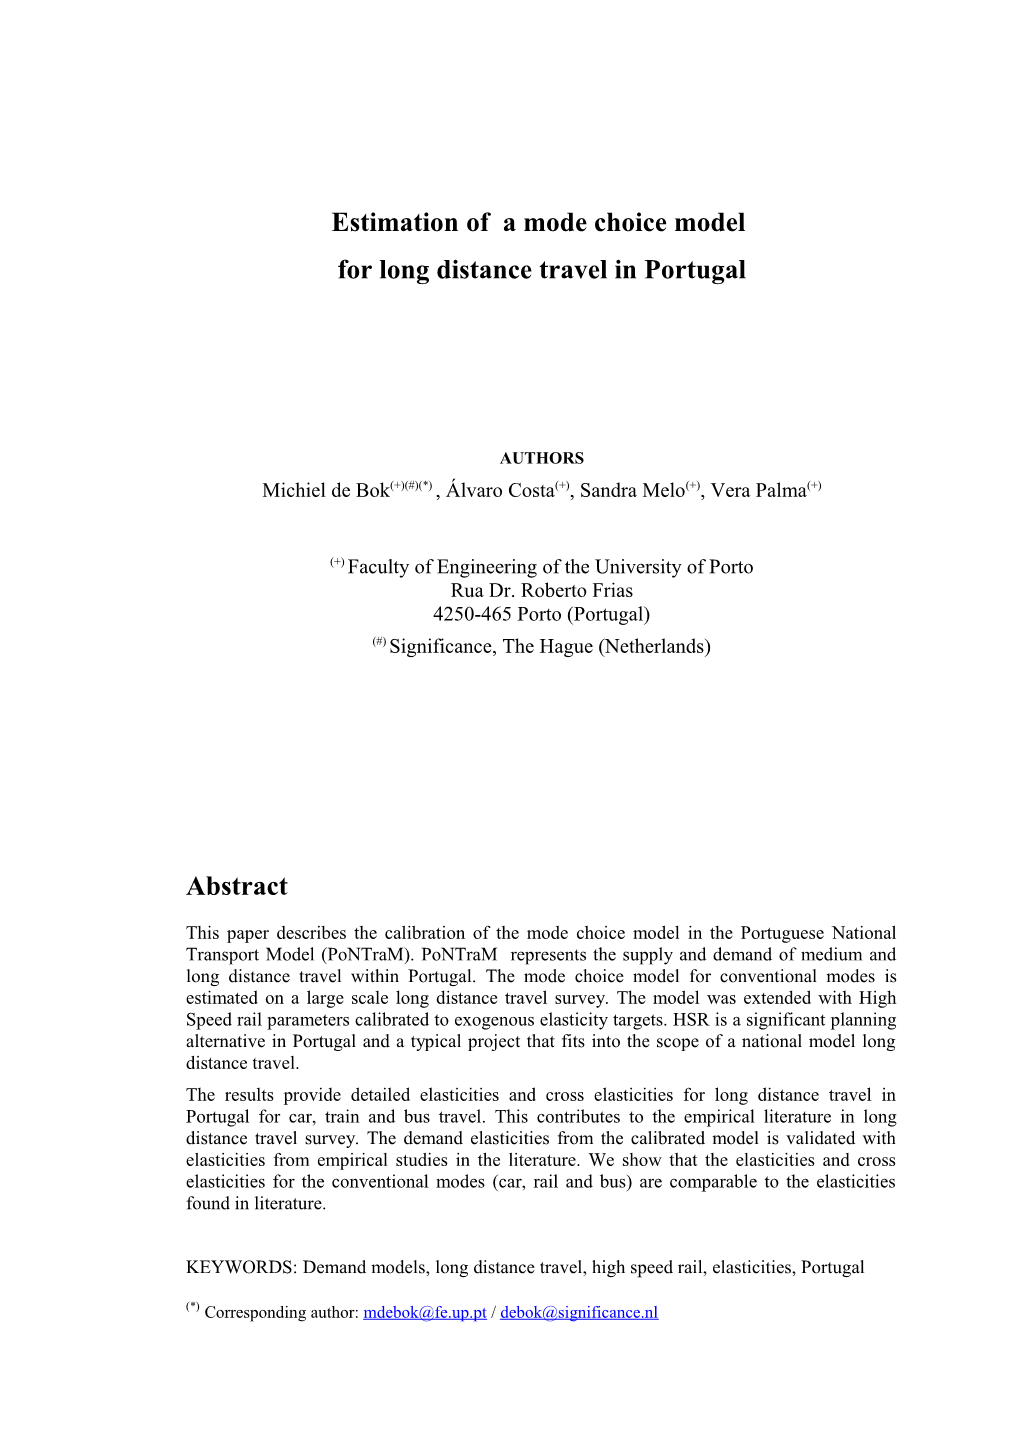 Estimation of a Mode Choice Model for Long Distance Travelin Portugal